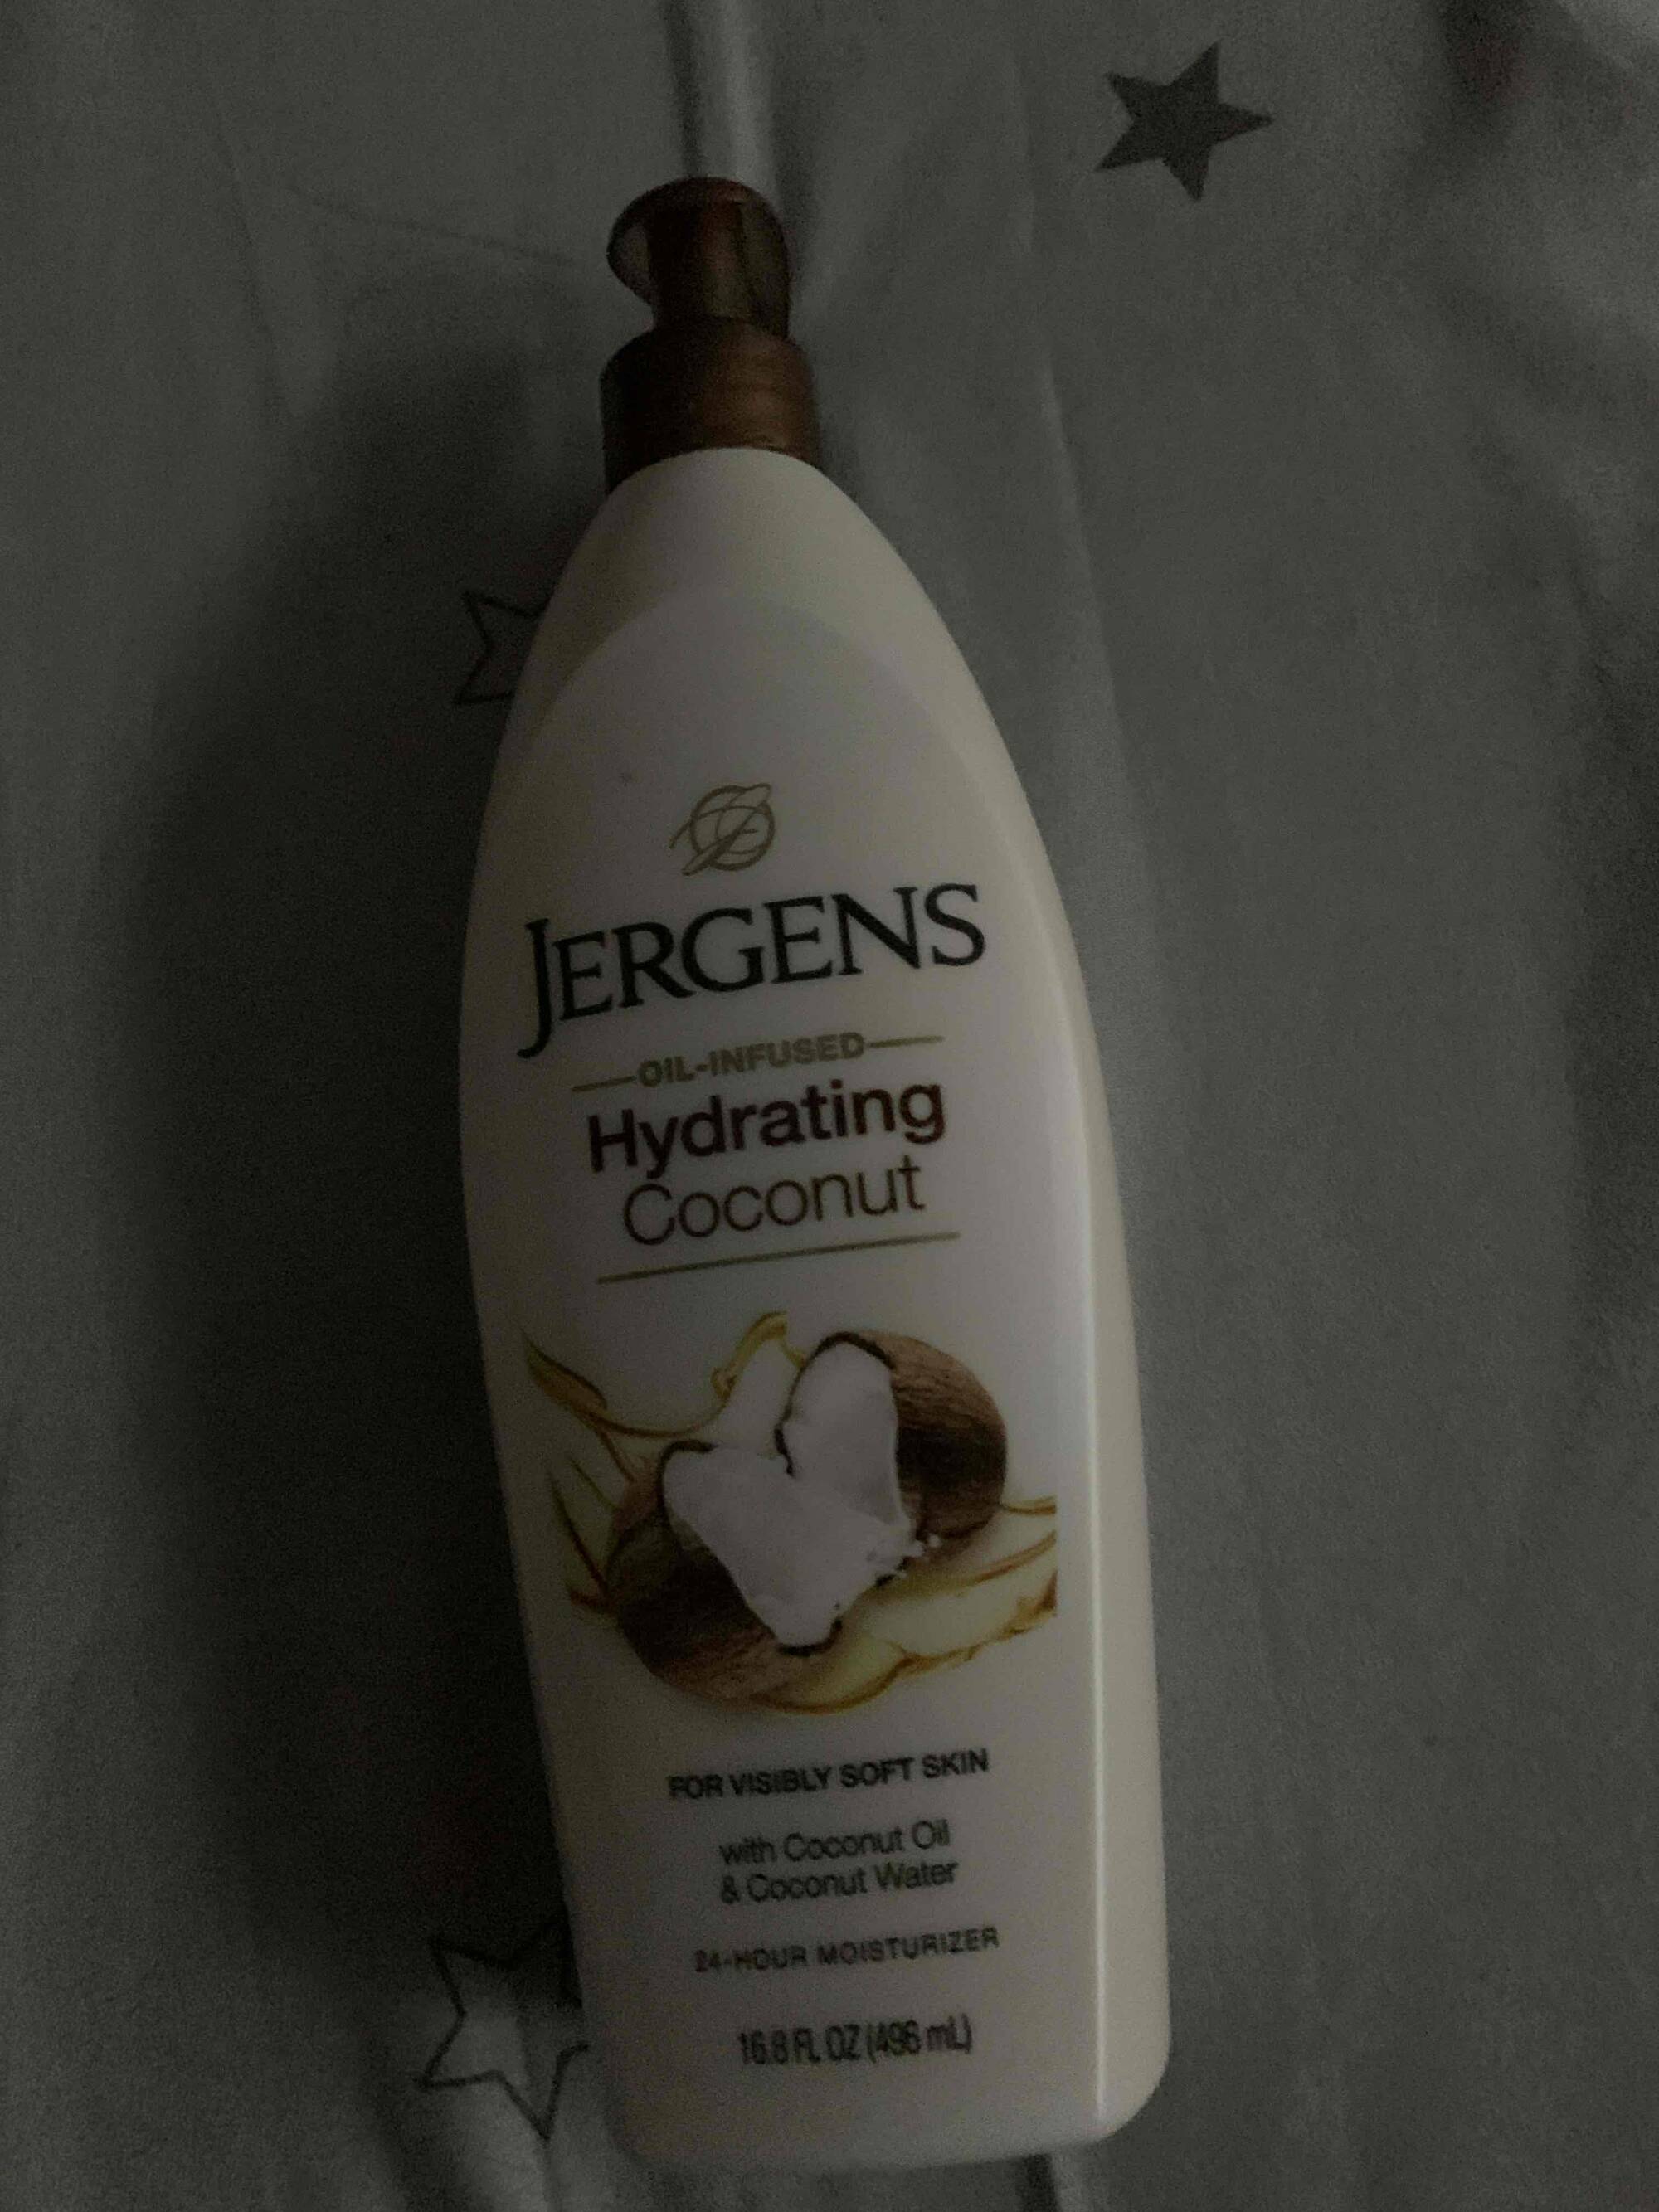 JERGENS -  Oil infused hydrating coconut